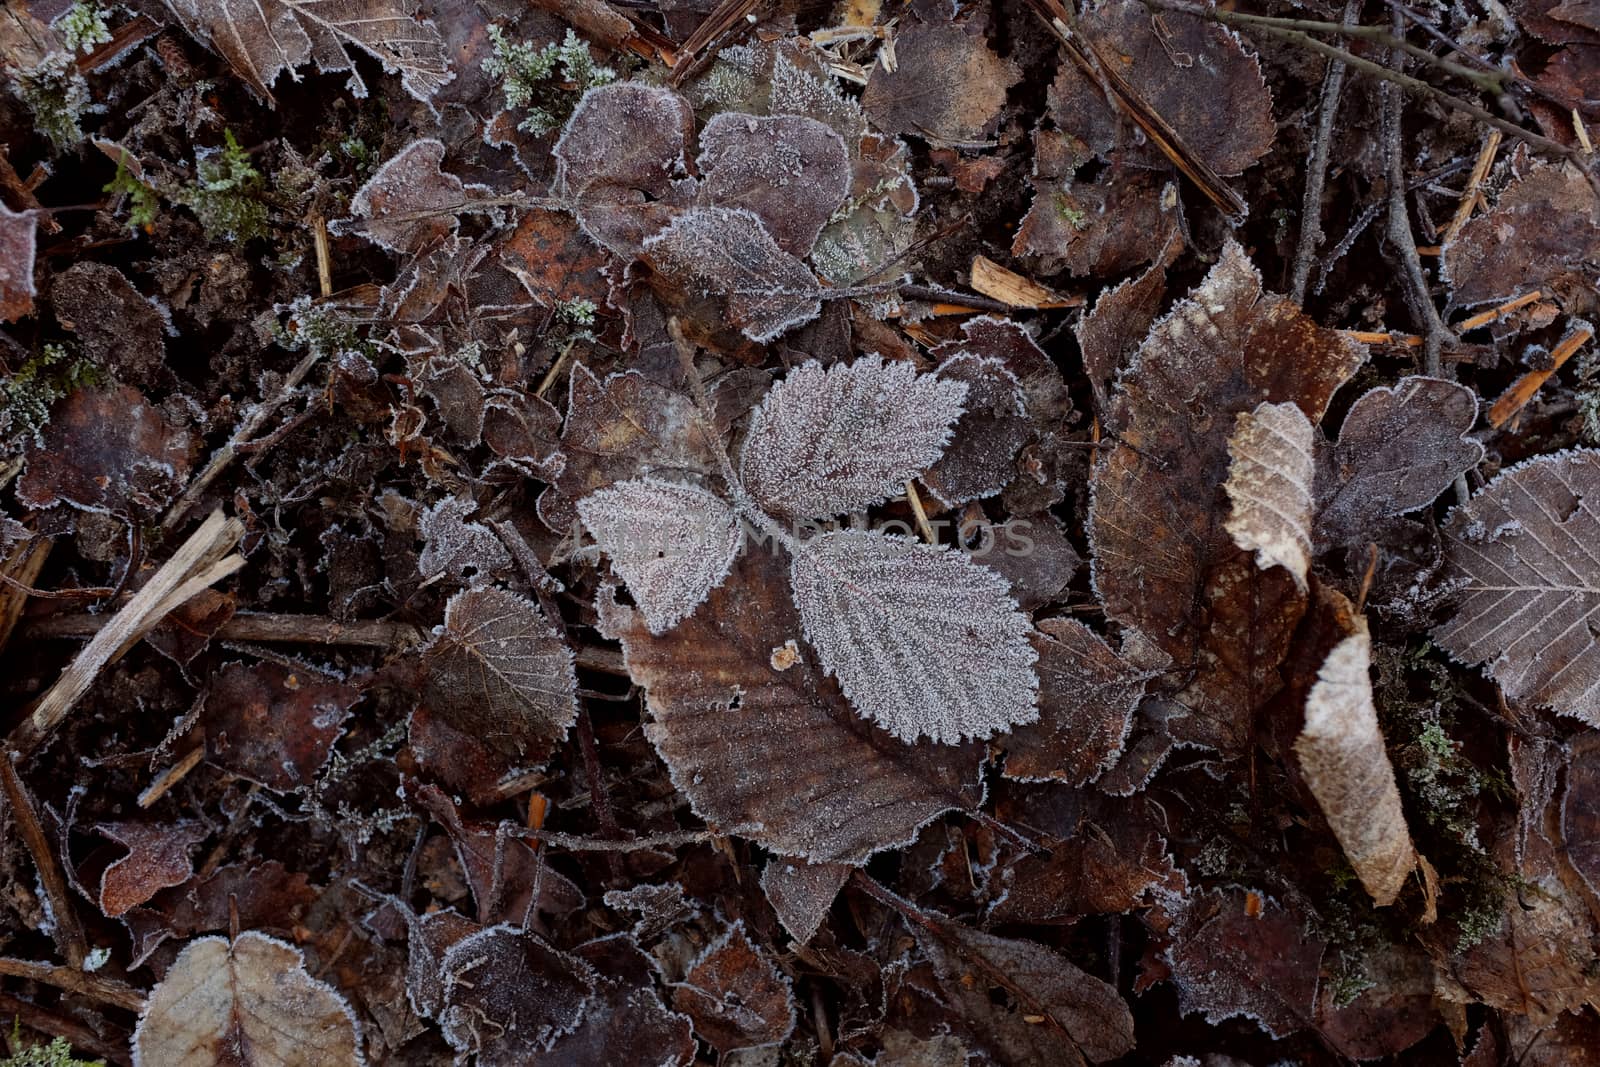 Ash leaves covered in frost crystals, among an abstract background of frosty dead leaves on the forest floor